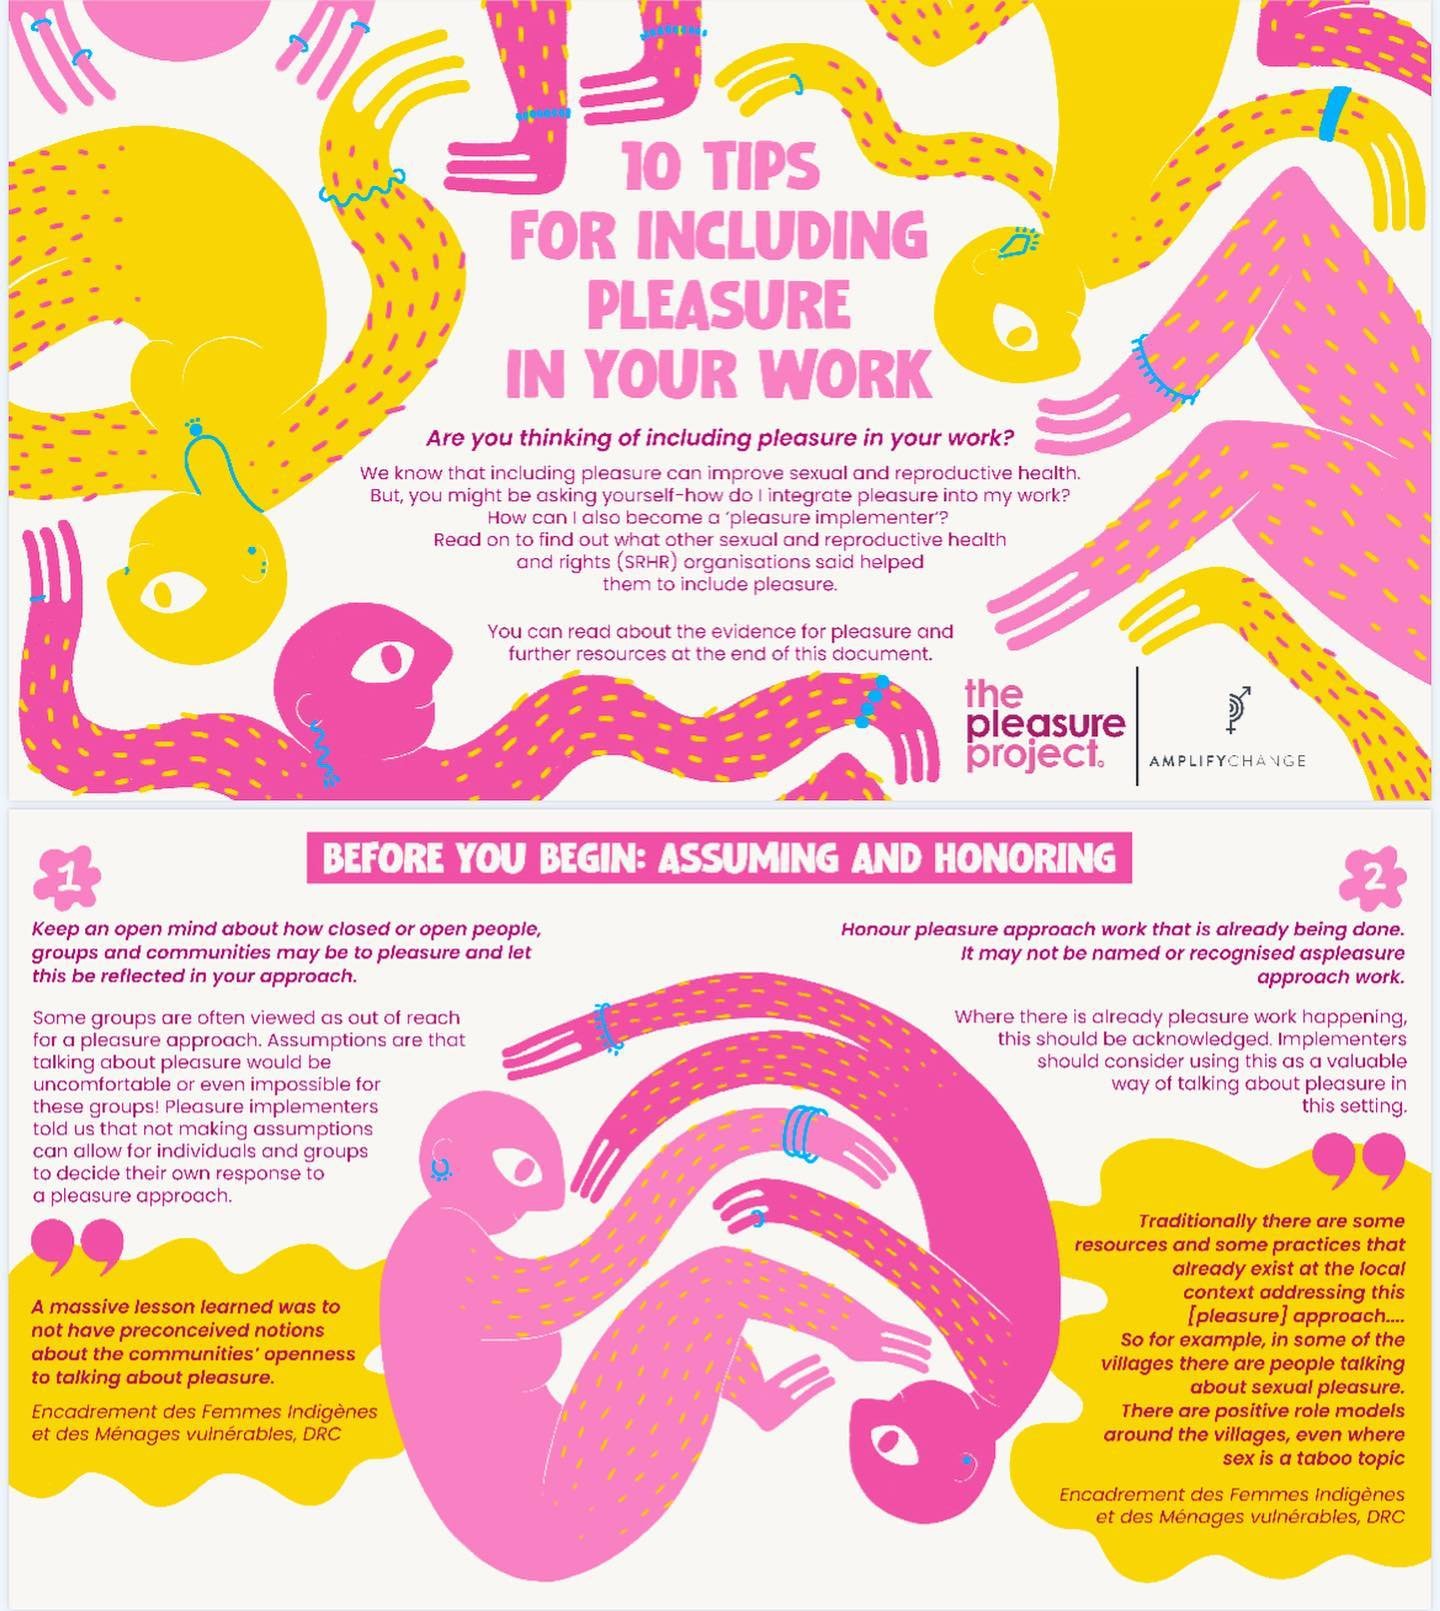 💜 10 TIPS FOR INCLUDING PLEASURE IN YOUR WORK by @the_pleasureproject &amp; @amplifychange 🙏🏾

🔥 YES, we can all learn from these insights. Let&rsquo;s share, discuss and #spreadtheword 

👀 Definitely check out the website of @the_pleasureprojec